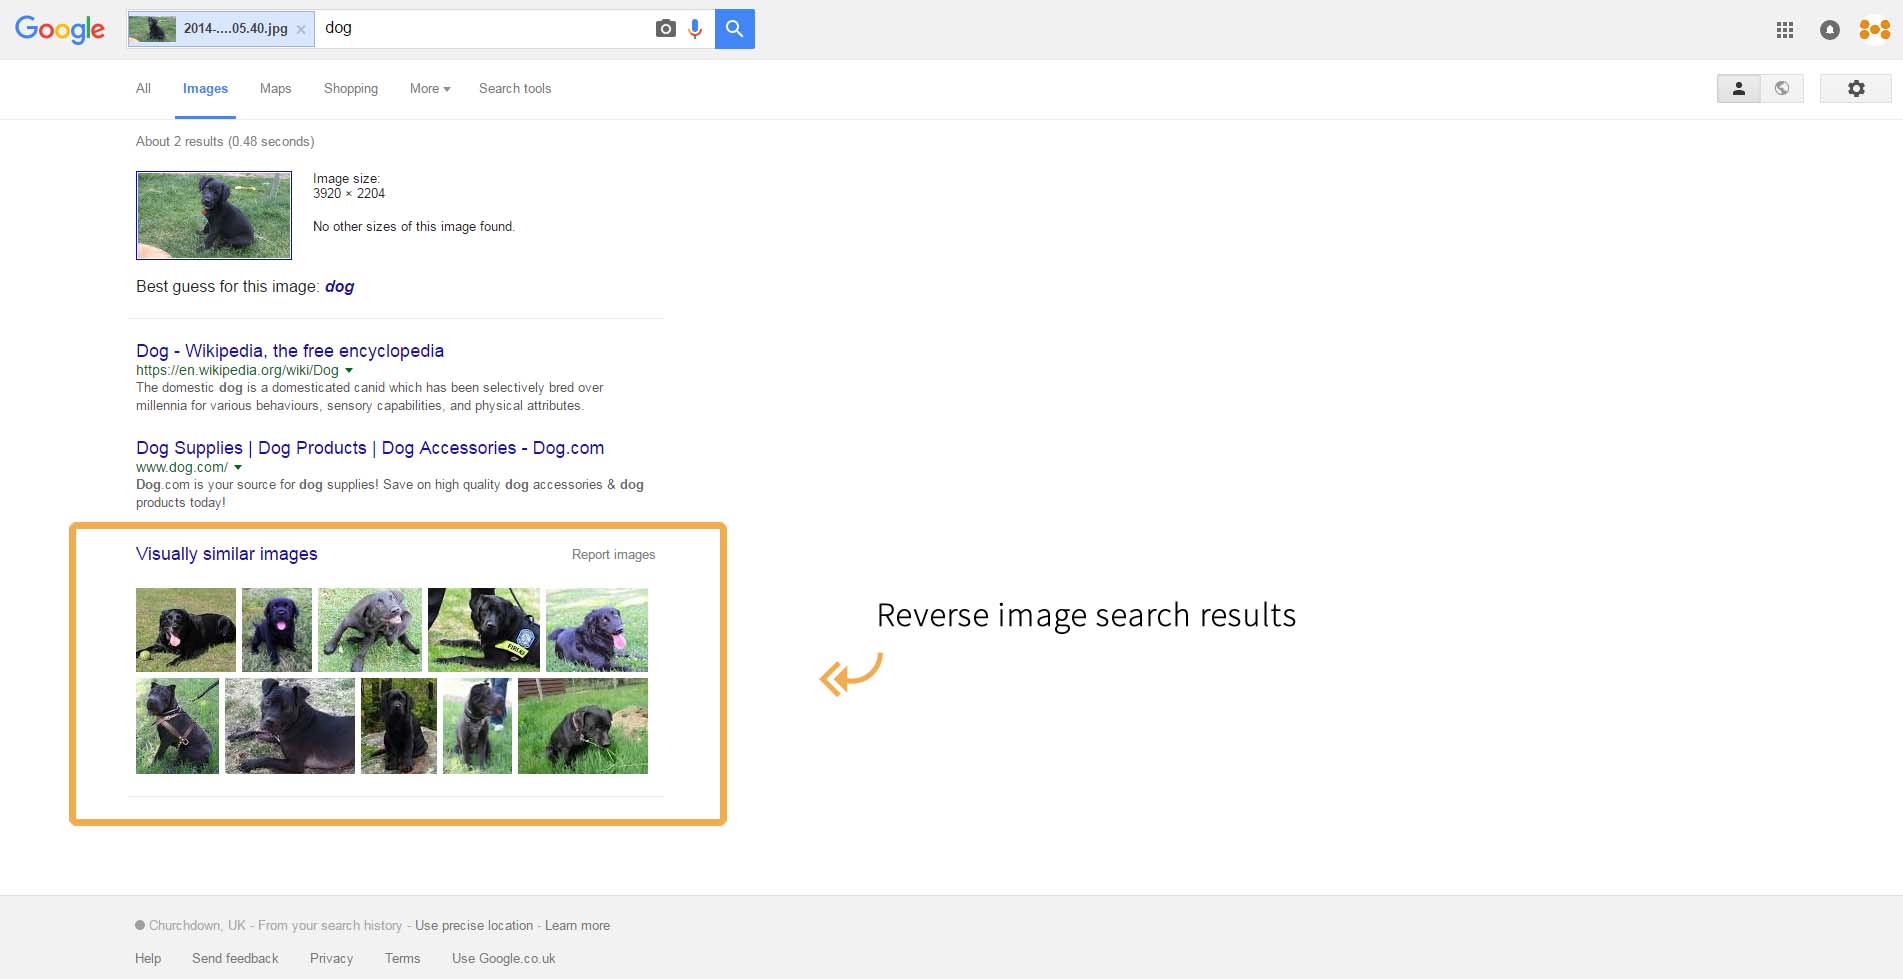 Reserve image search results